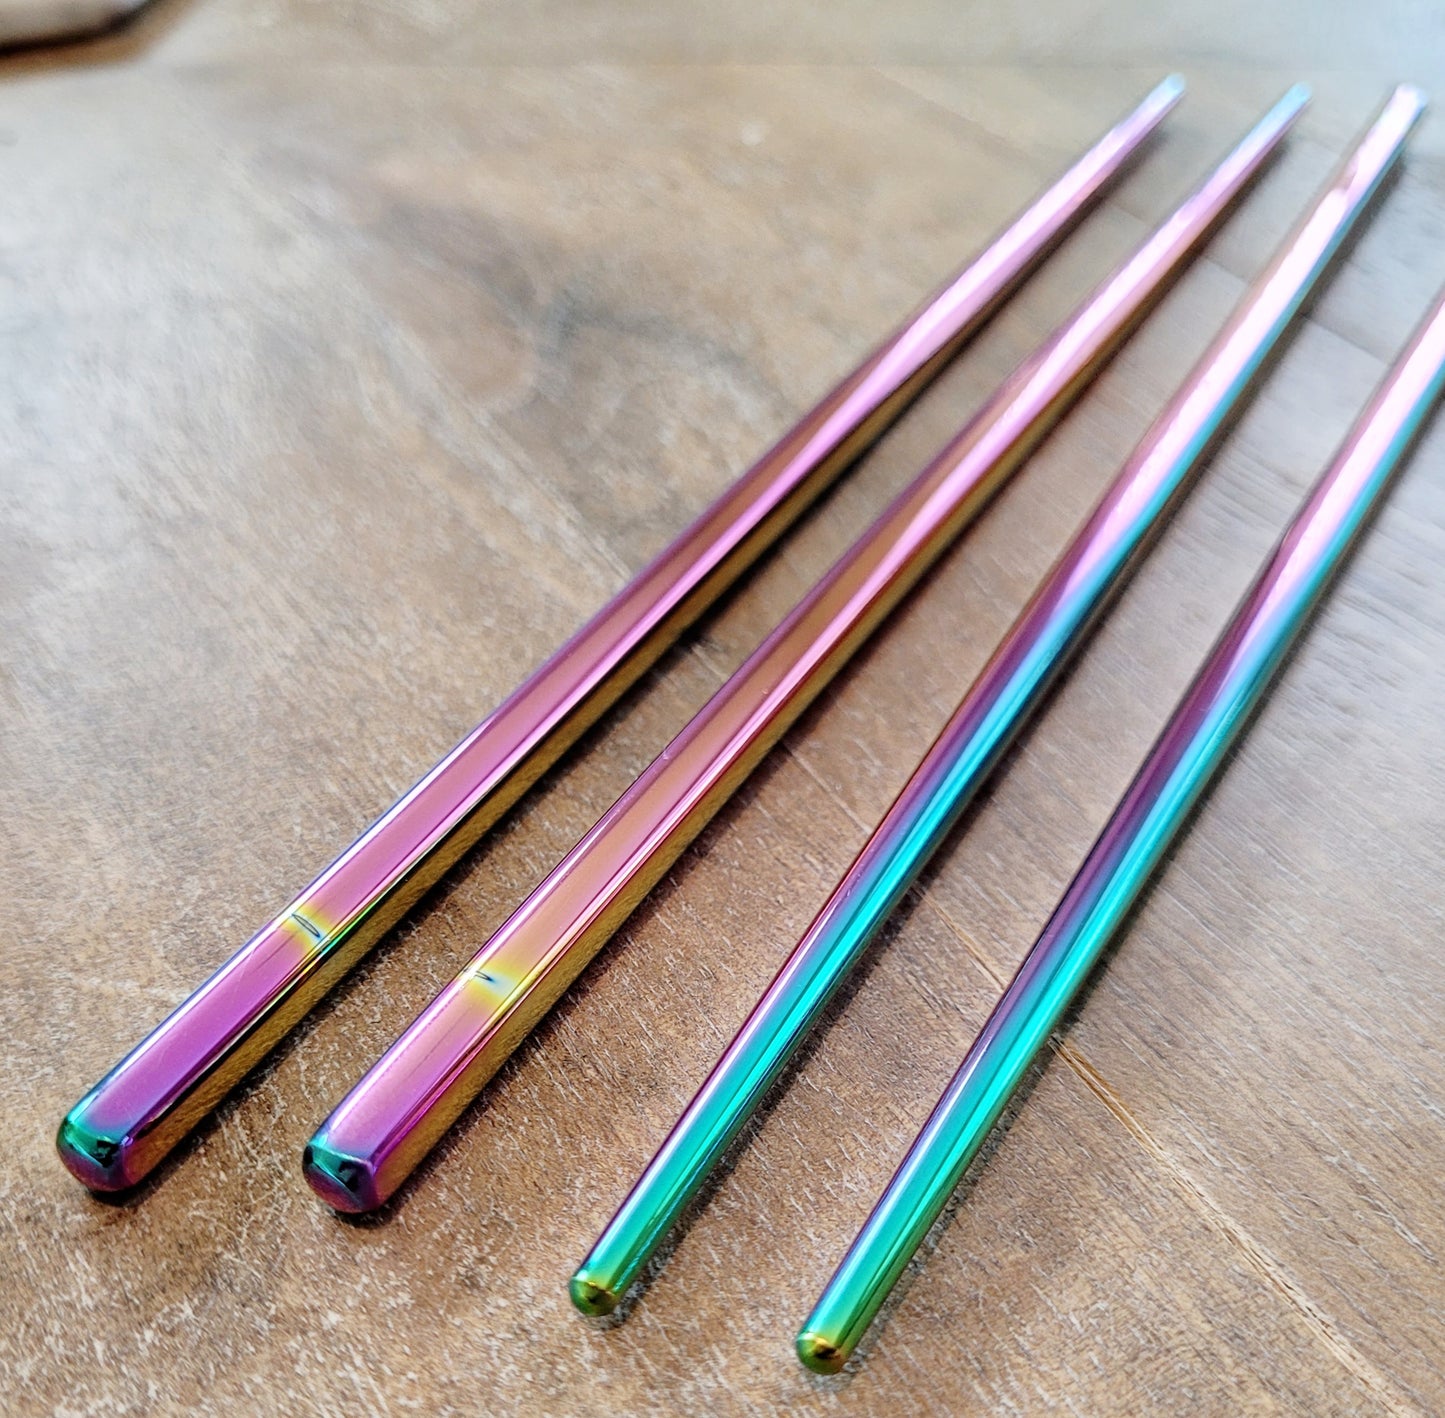 Chop Sticks - Stainless Steel - Multicolored